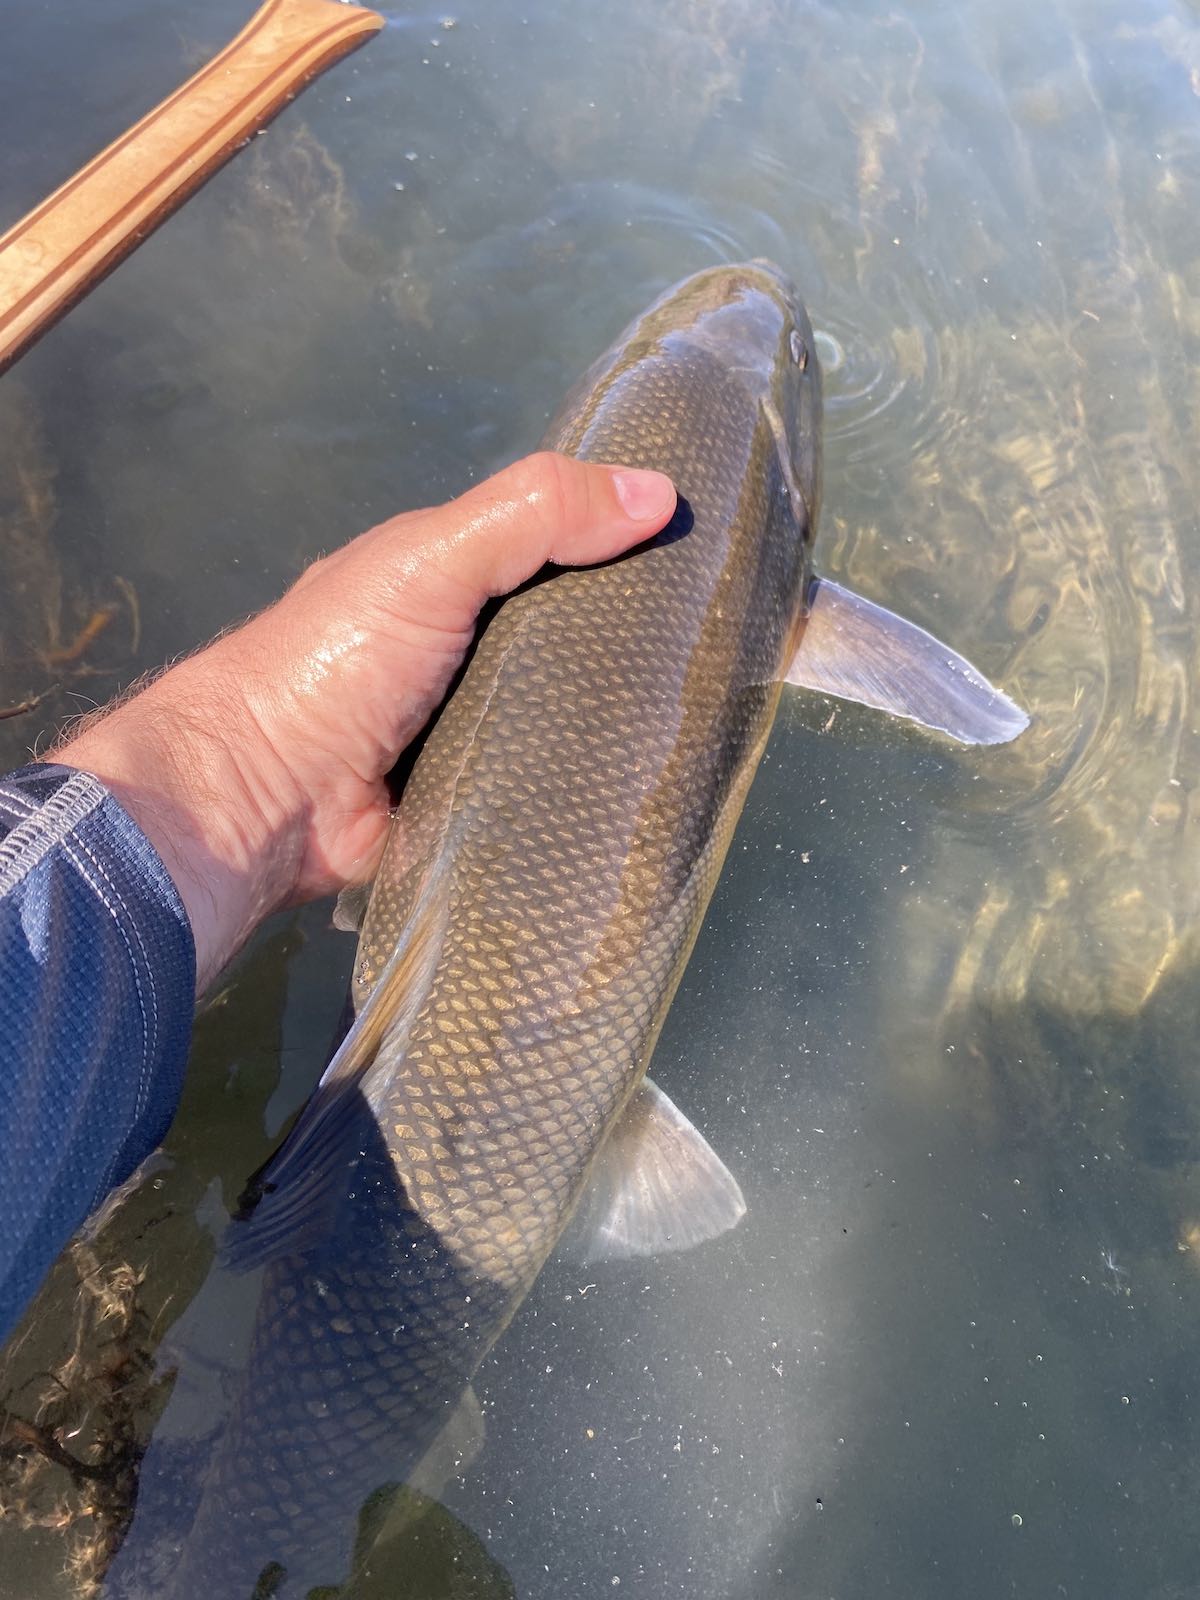 big sucker fish released into river after being caught